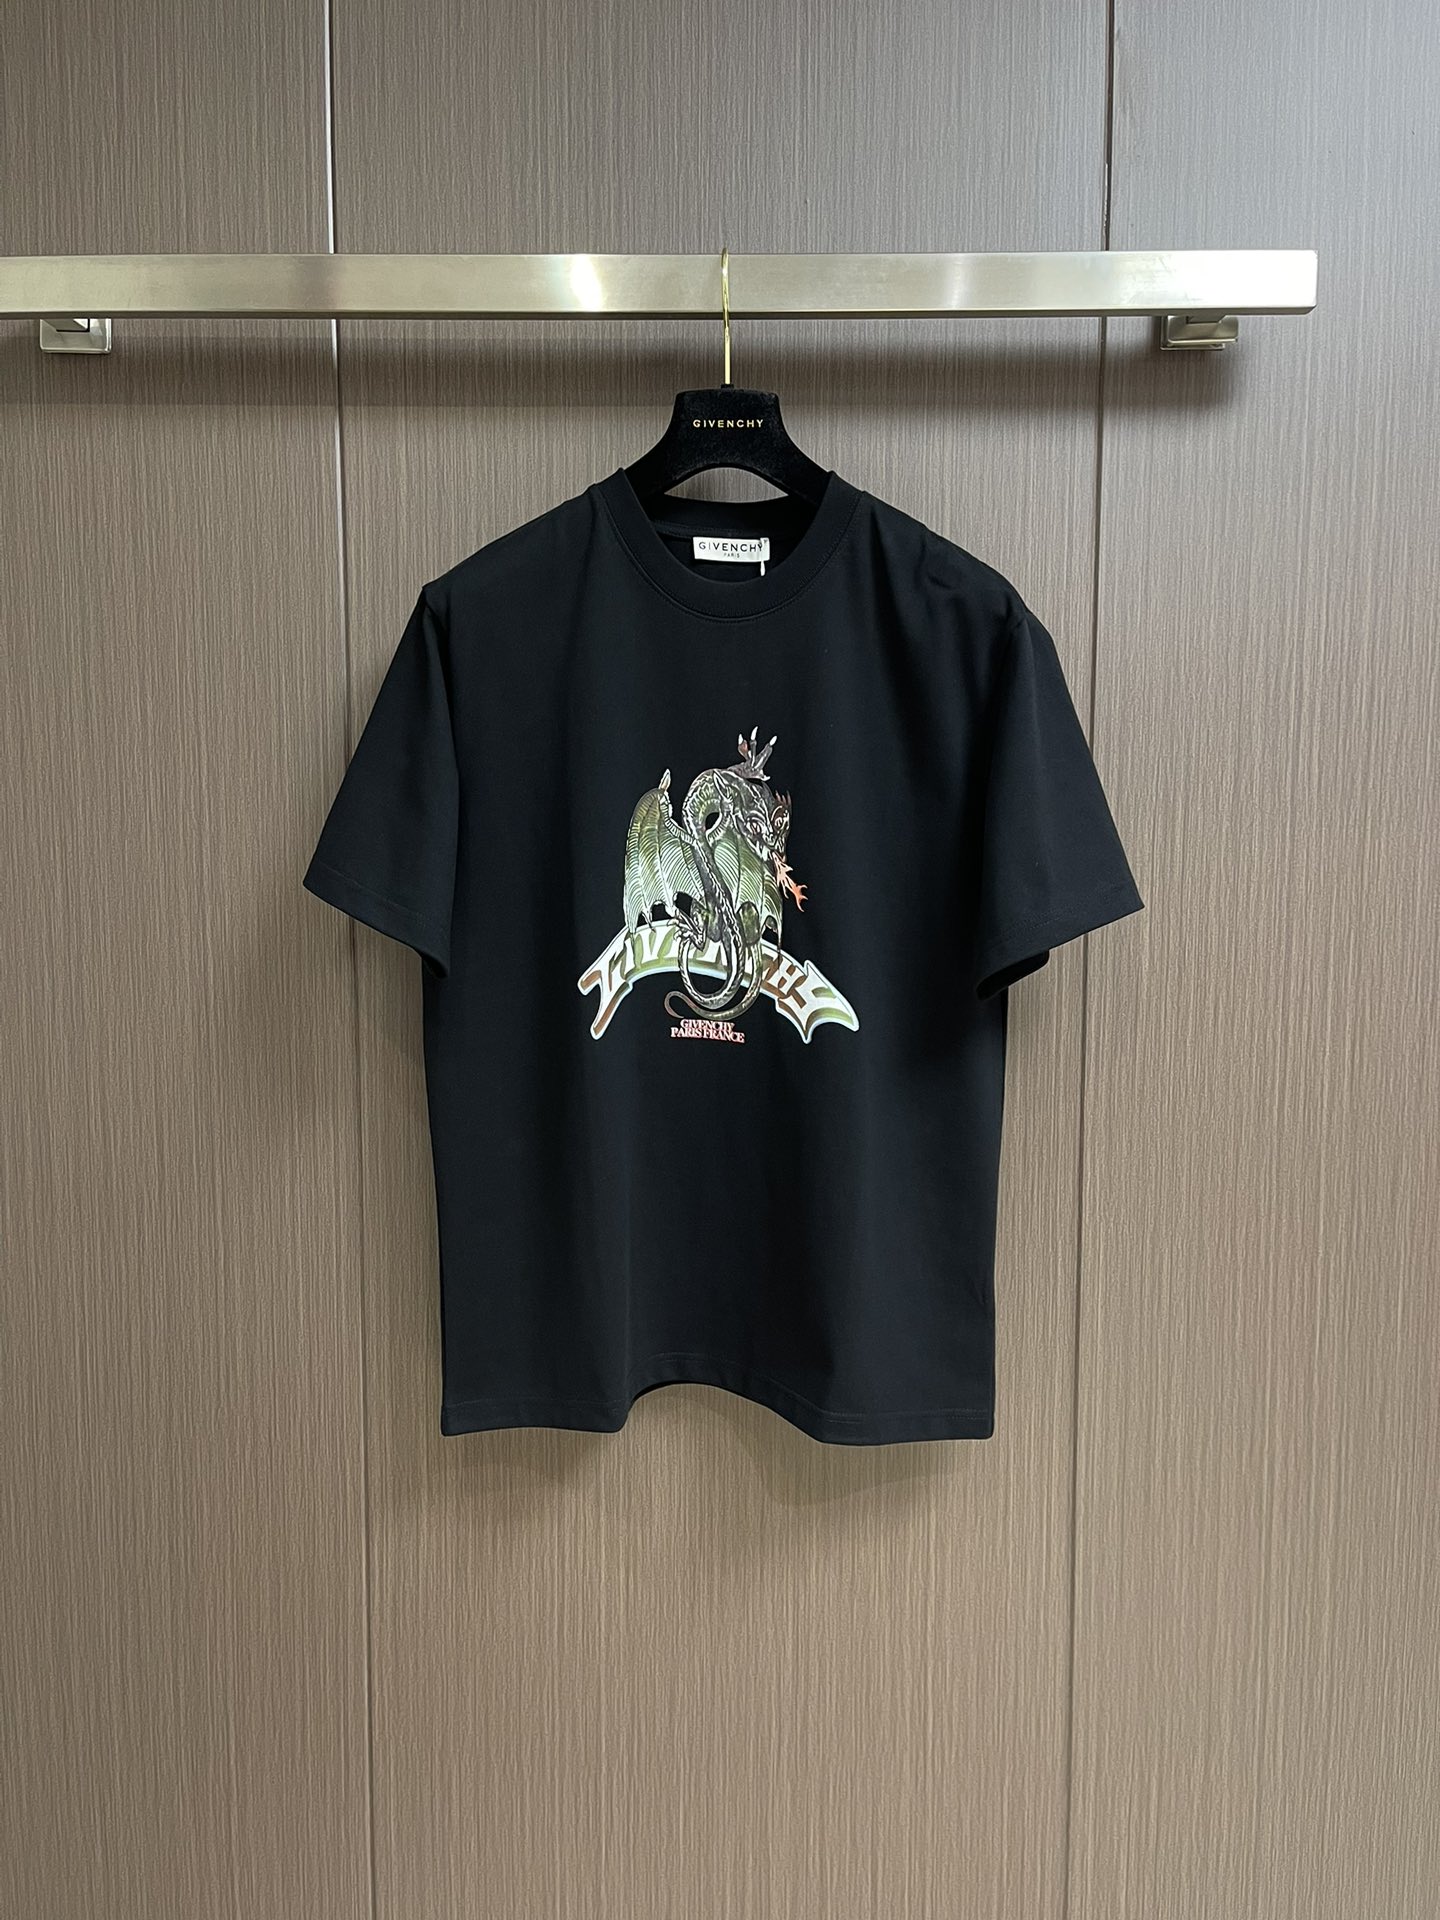 Givenchy Clothing T-Shirt High Quality
 Embroidery Unisex Cotton Spring/Summer Collection Short Sleeve